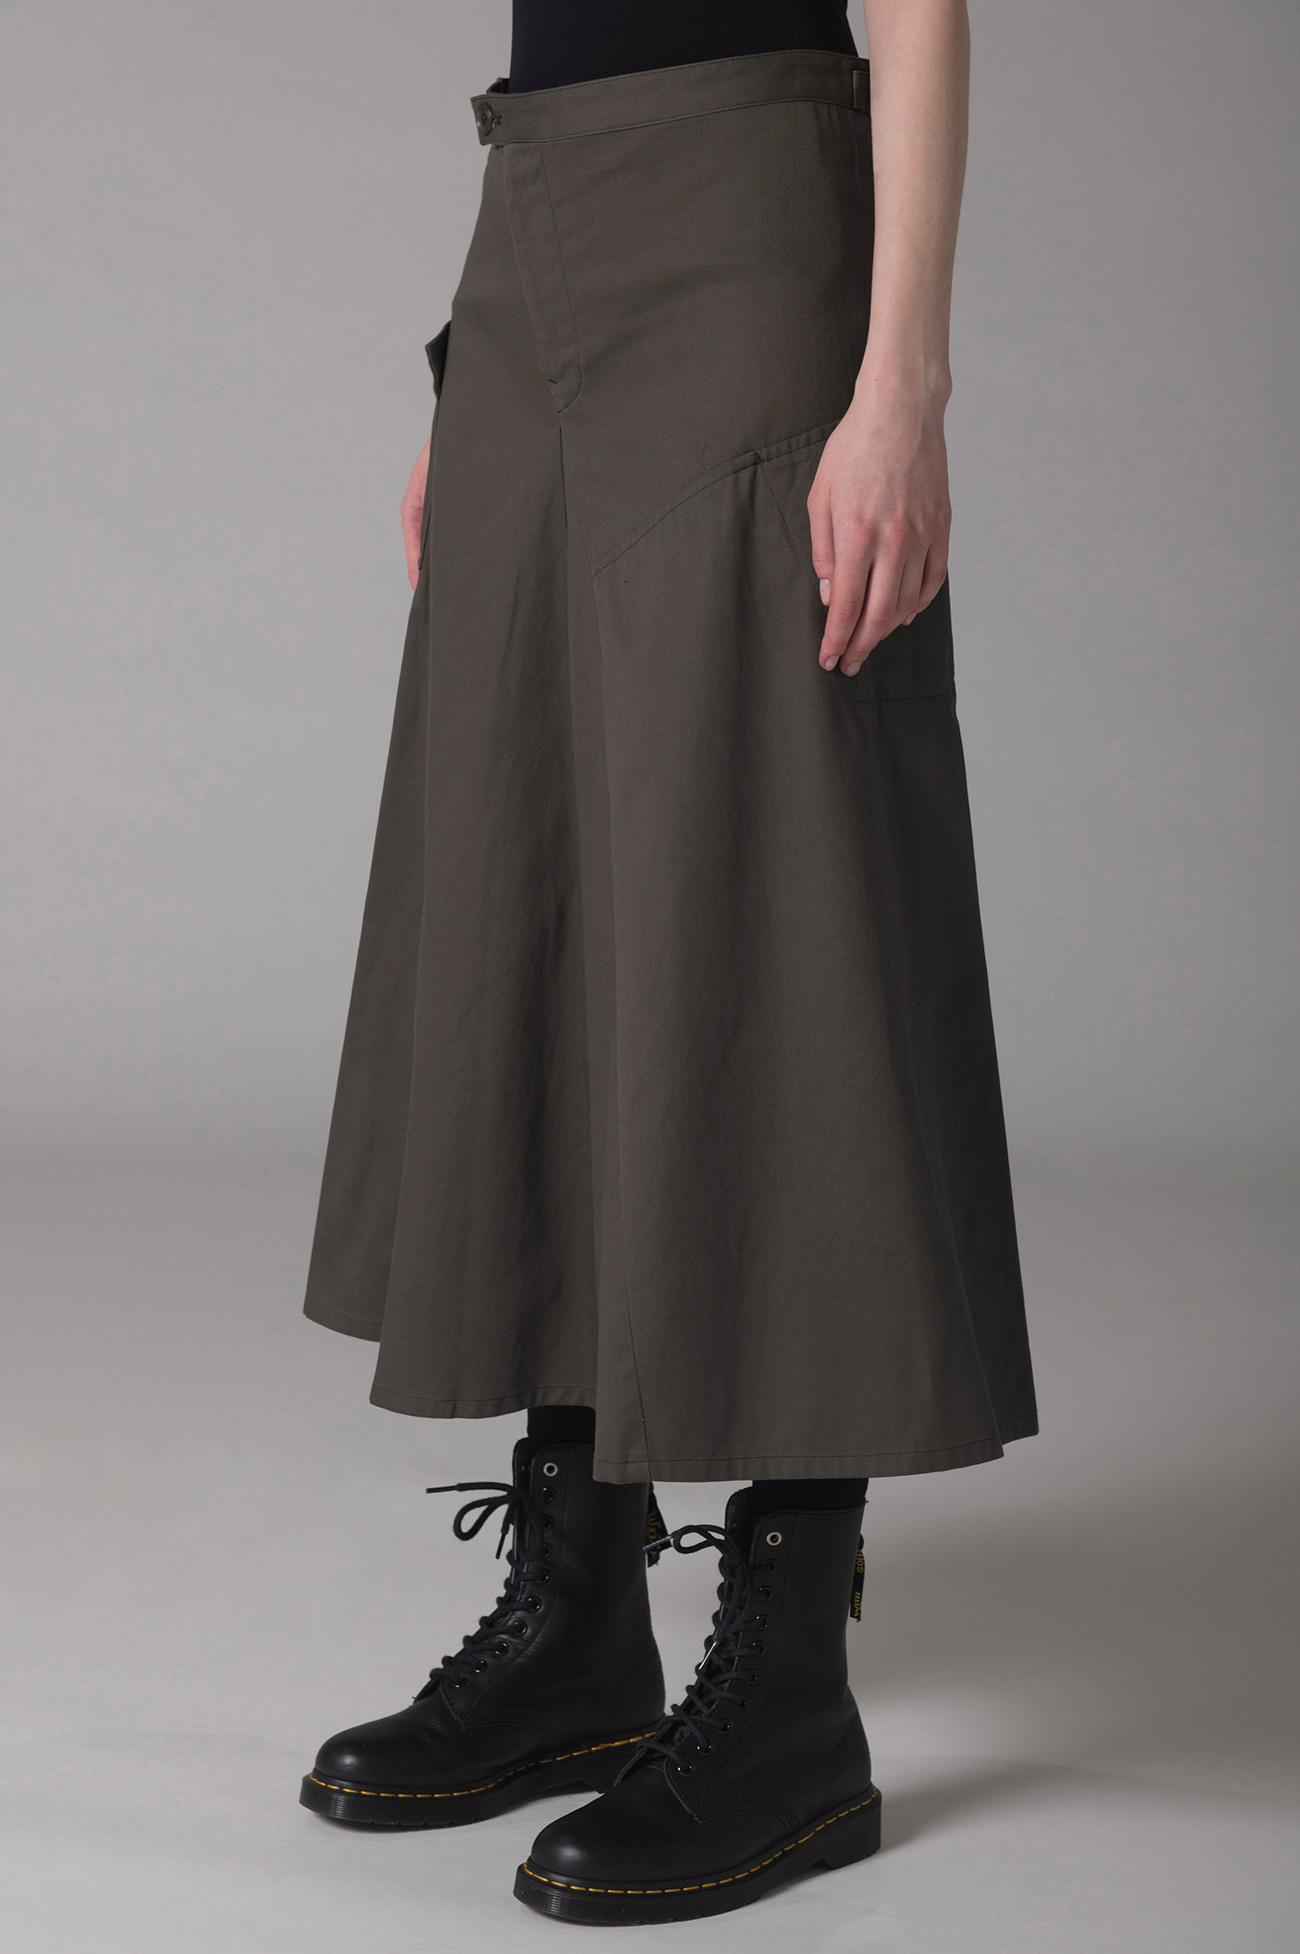 [Y's BORN PRODUCT]COTTON TWILL GUSSET FLARE SKIRT